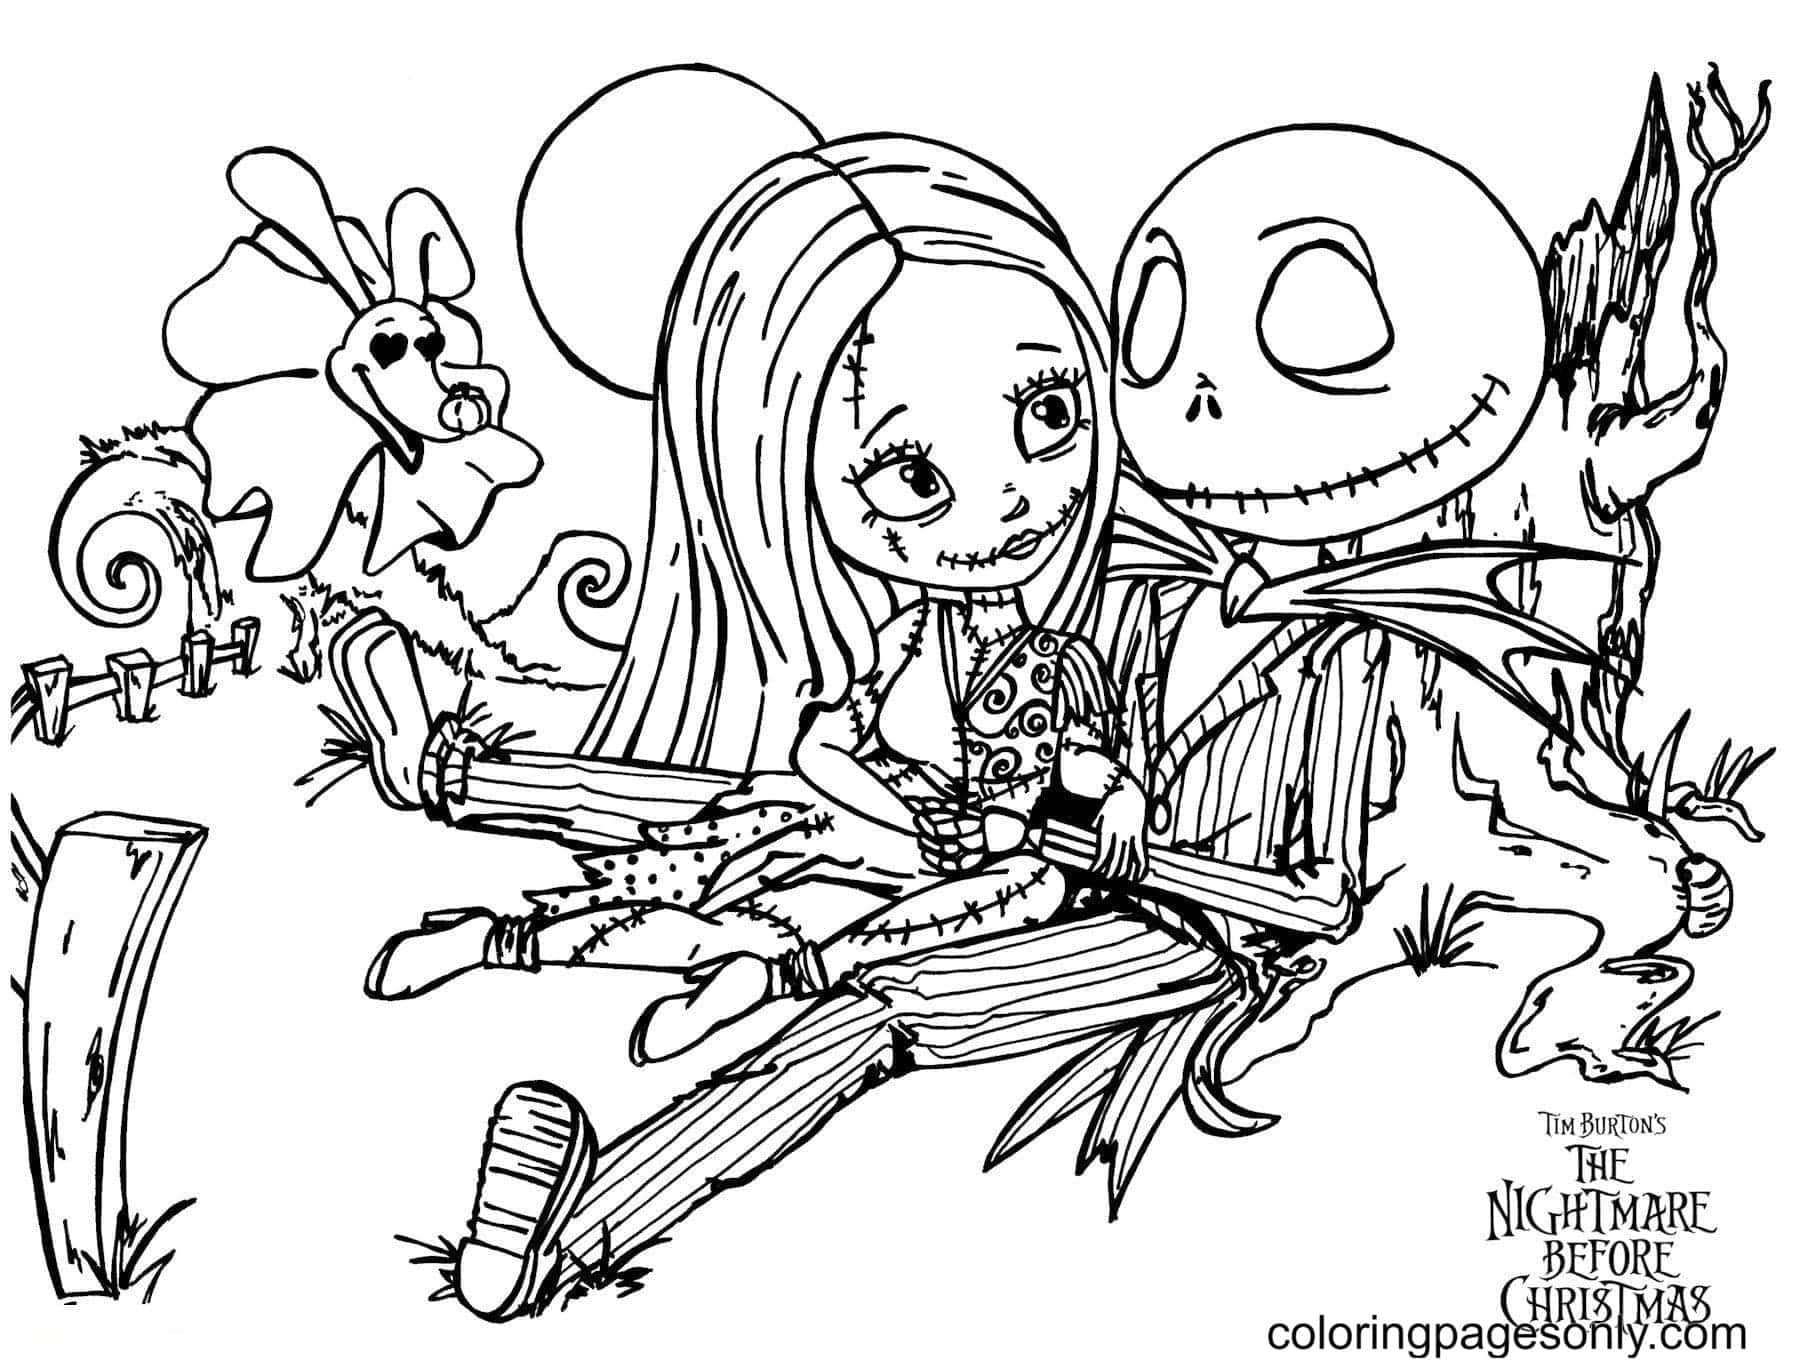 Cartoon characters Coloring Pages - Nightmare Before Christmas Coloring  Pages - Coloring Pages For Kids And Adults